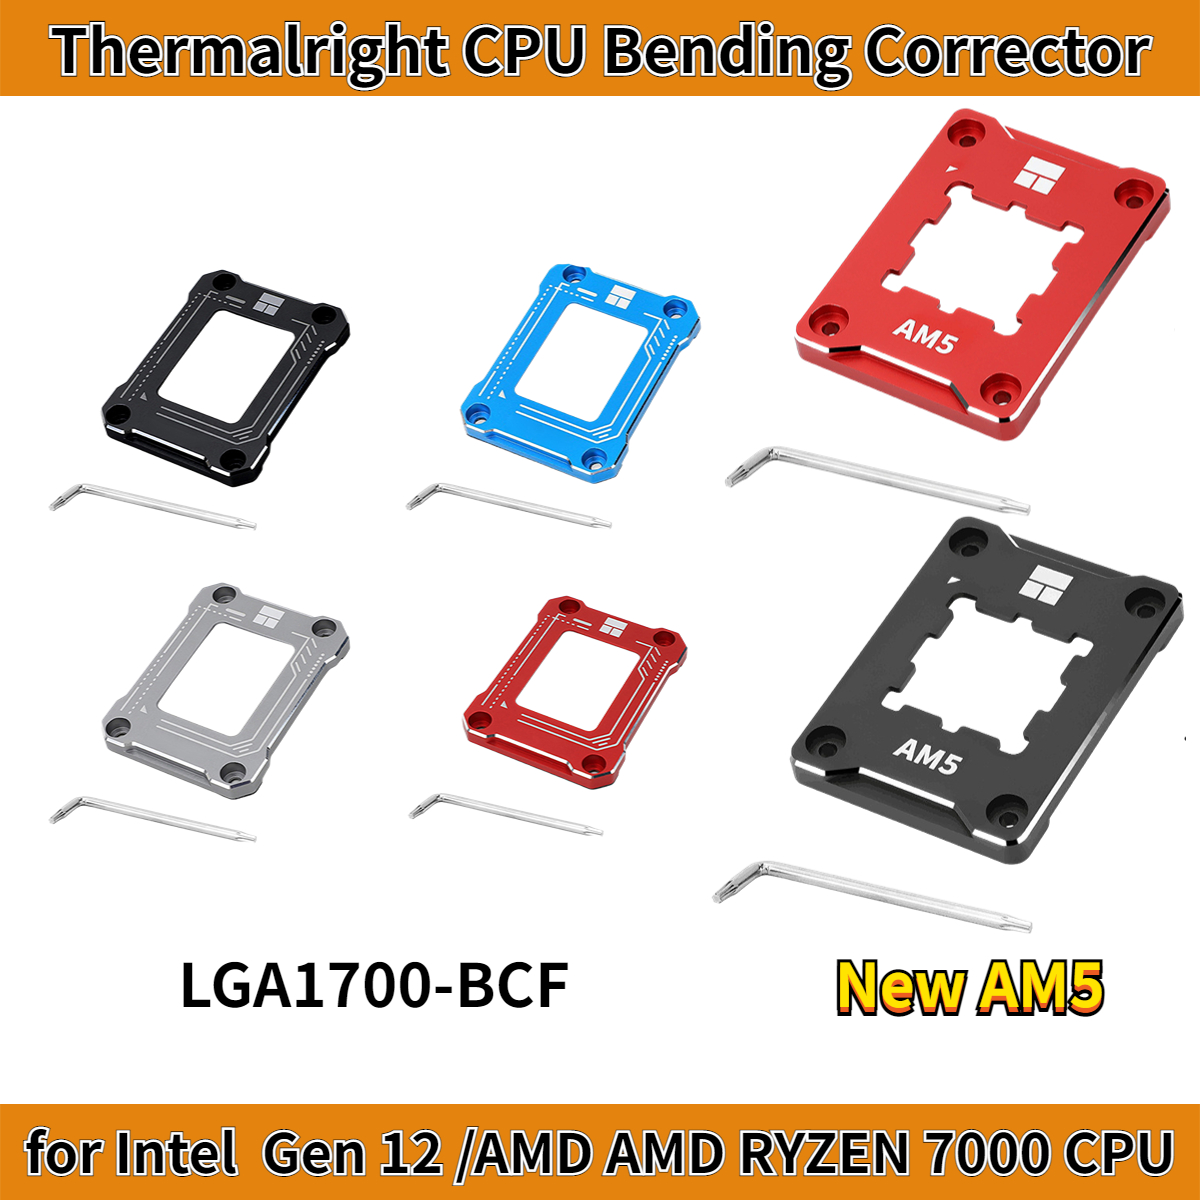 Thermalright-LGA1700-BCF-AMD-ASF-CPU-Bending-Correction-Fixed-Buckle-CNC-Aluminum-Alloy-for-Intel-Gen